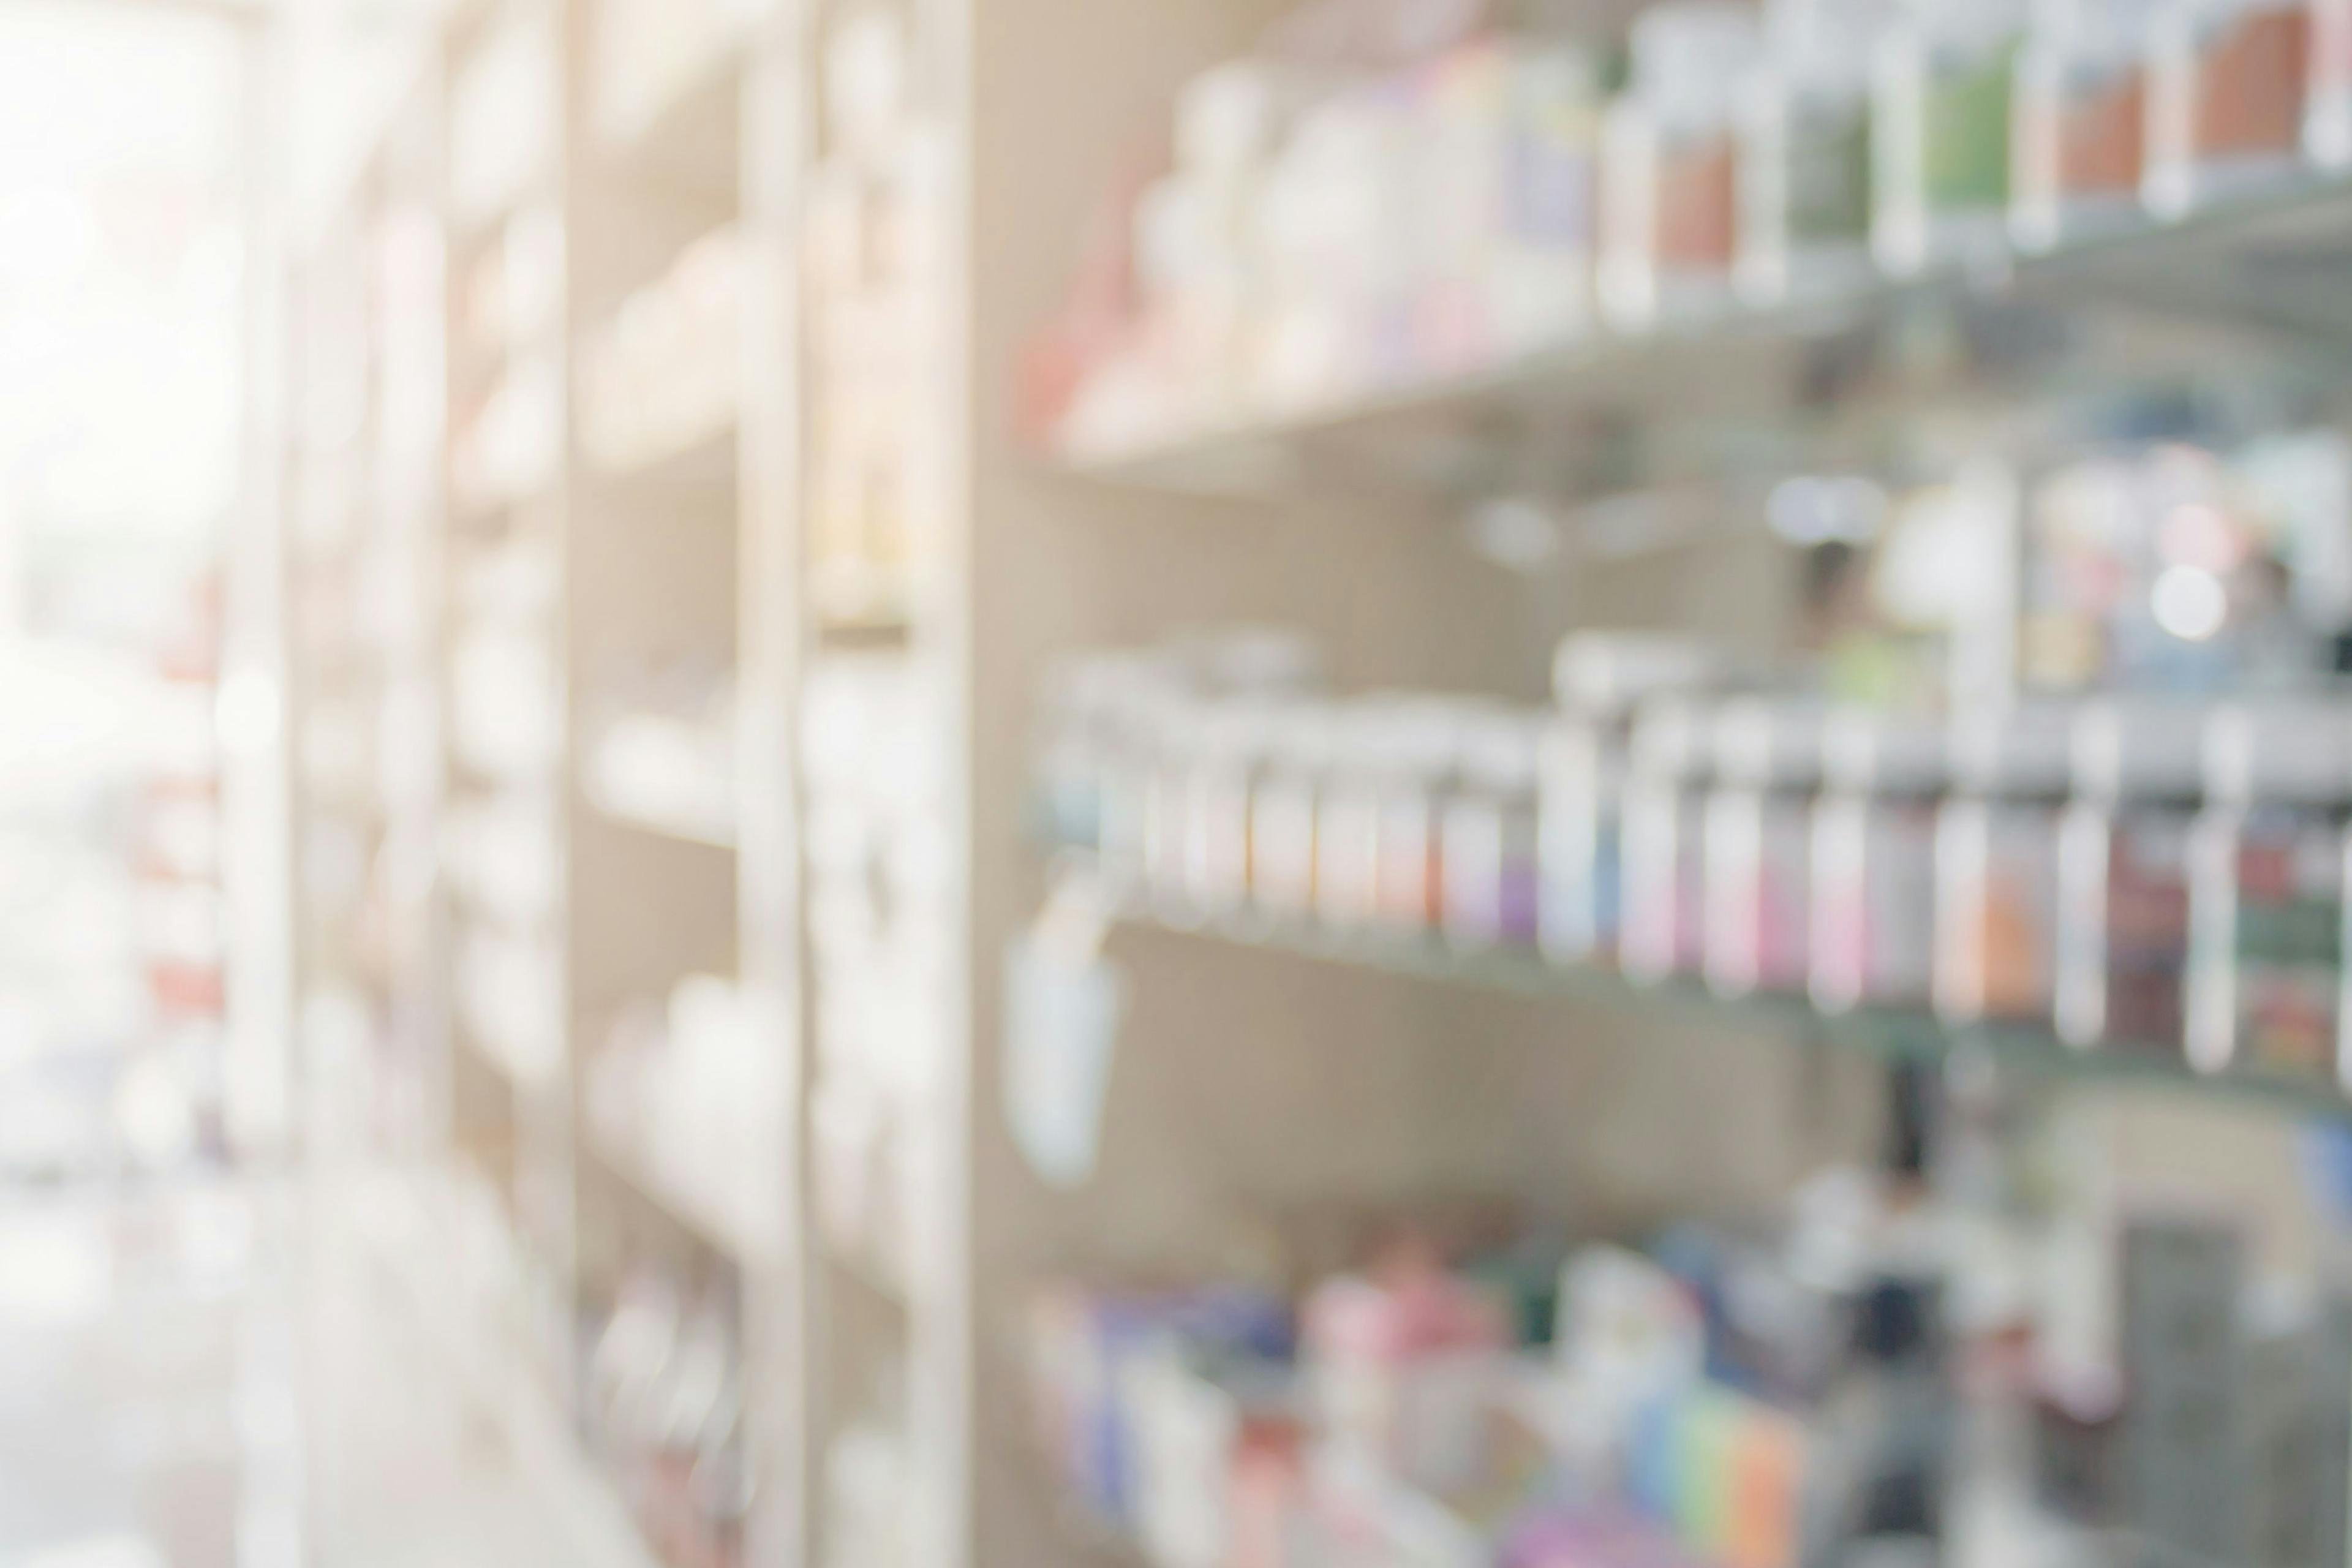 Such a broad spectrum of duties and responsibilities can lead to pharmacist burnout and decreased performance of hospital pharmacies. Image Credit: © Piman Khrutmuang - stock.adobe.com